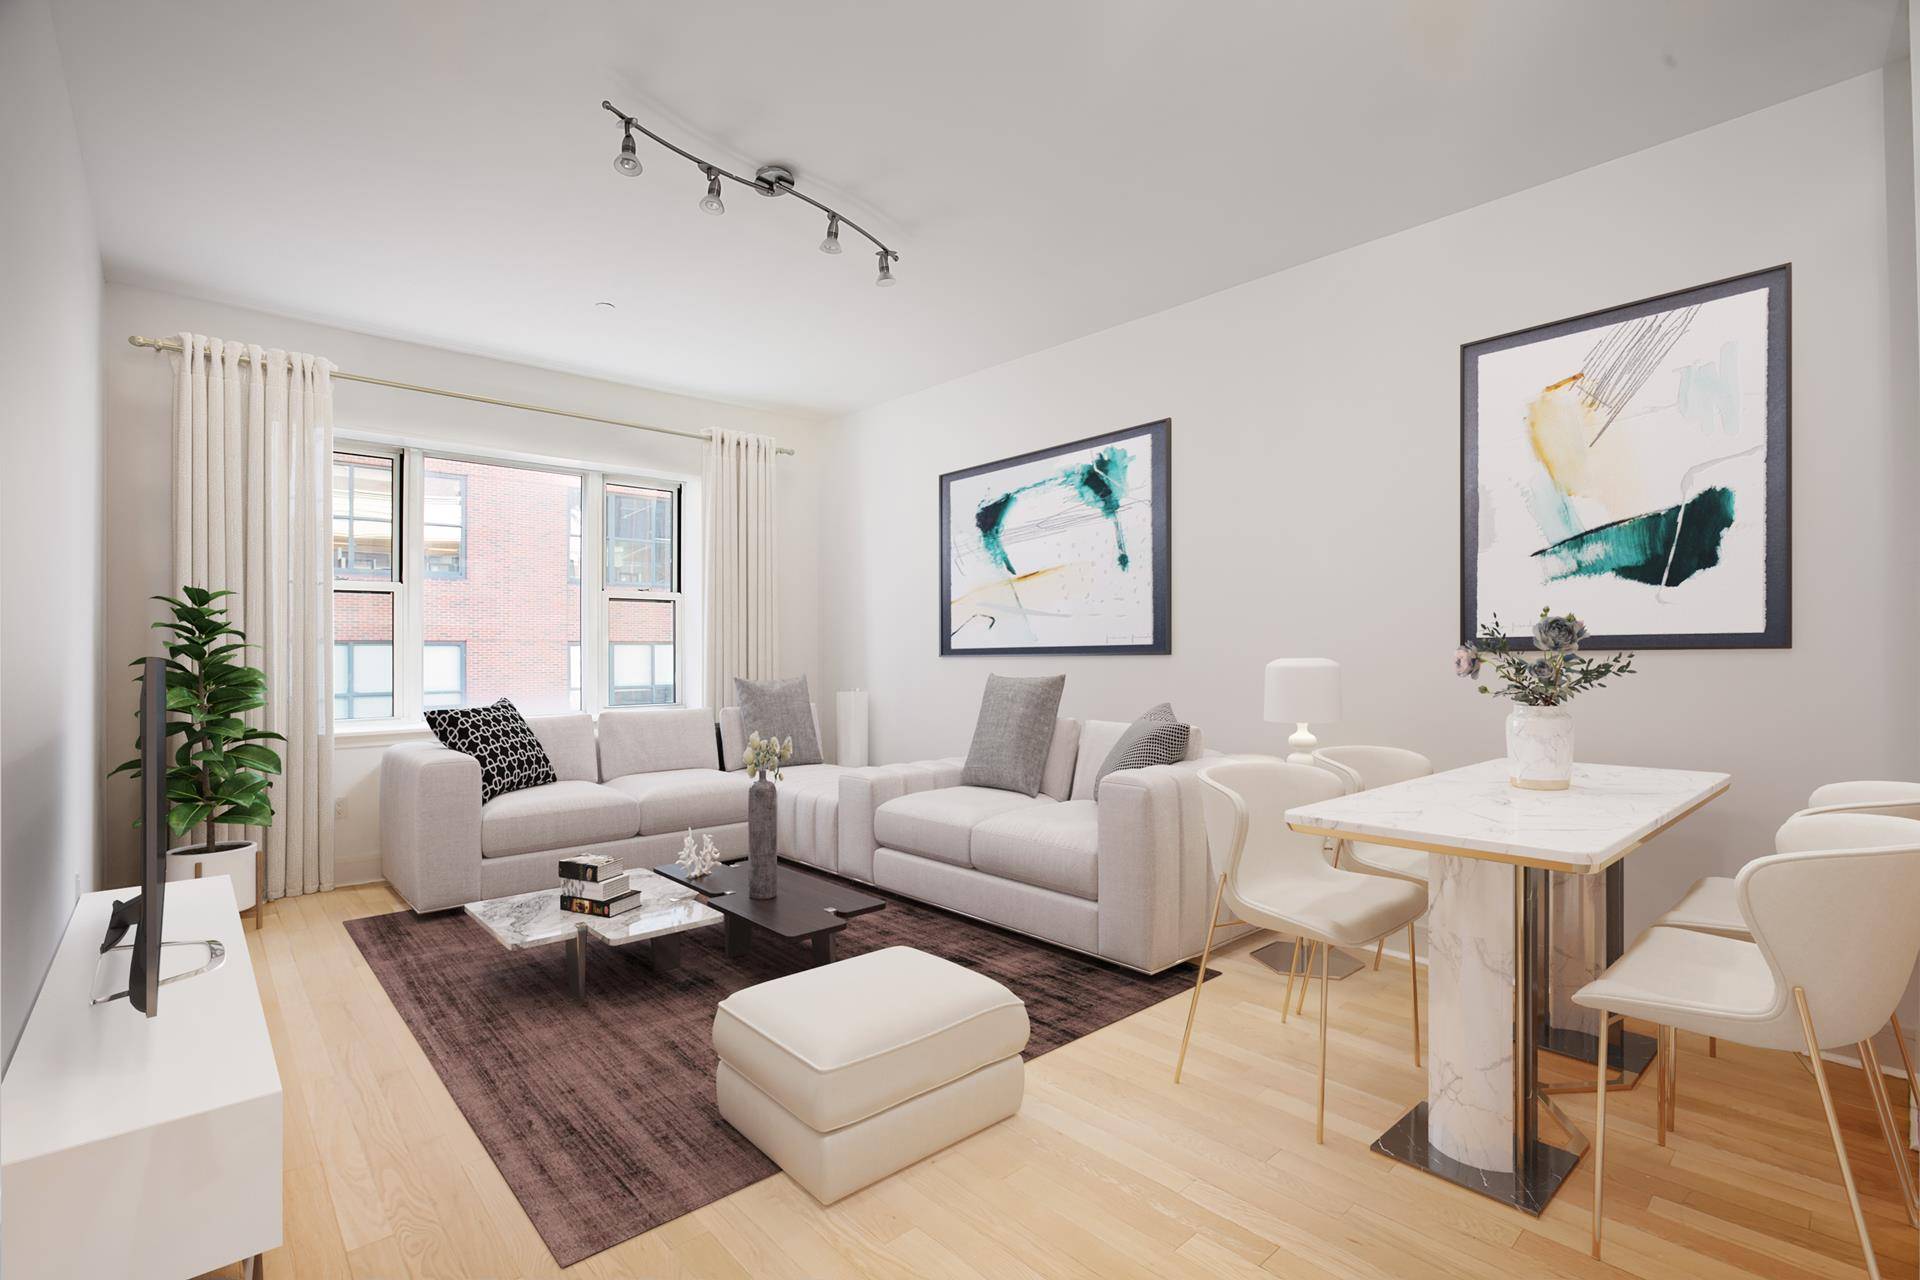 NEW PRICE ! Whether an investor, a first time buyer or a long time New York resident, this modern, south facing condo unit has all you need.